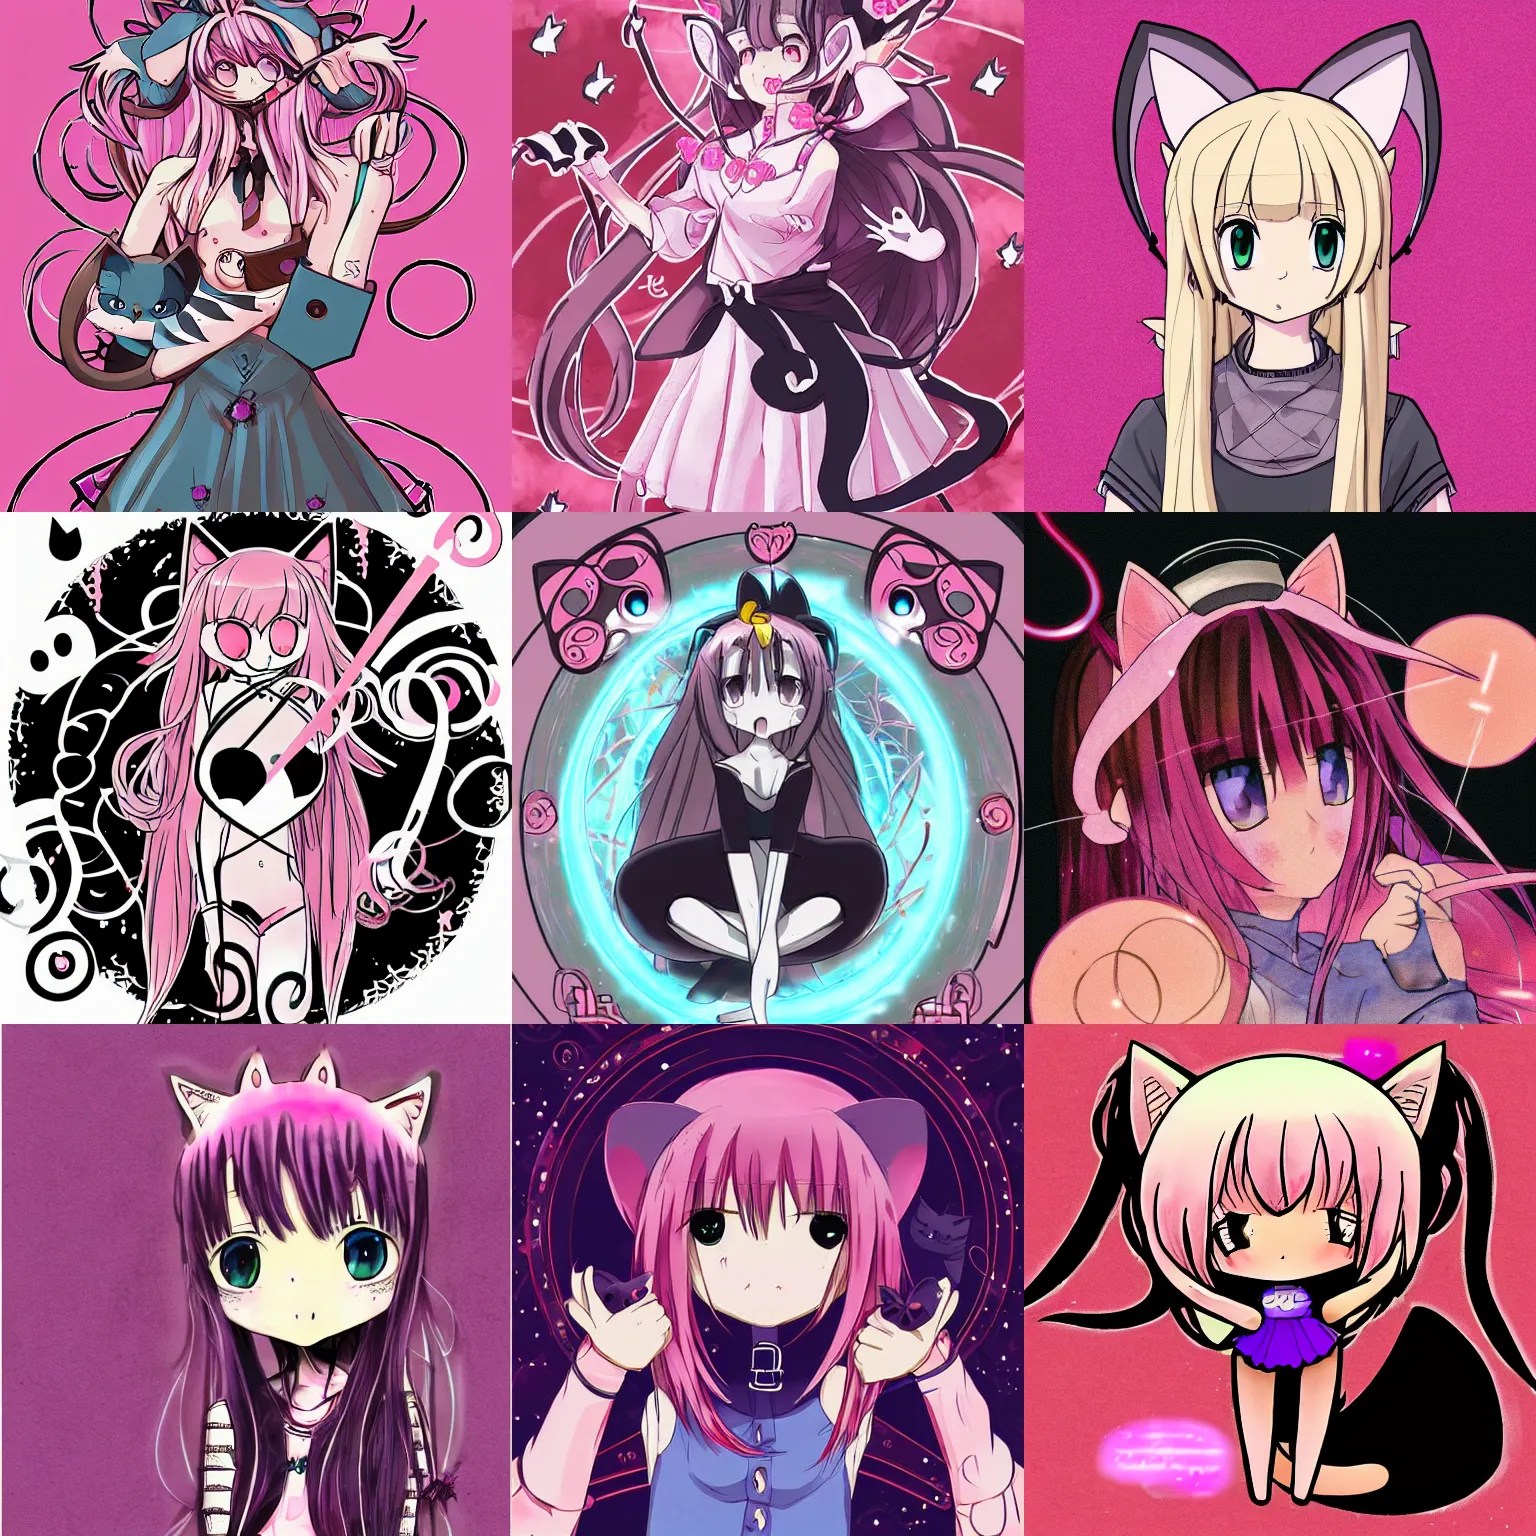 Prompt: card art of anime (cat) girl girl with cat ears drawing magic circles. Pink hue.